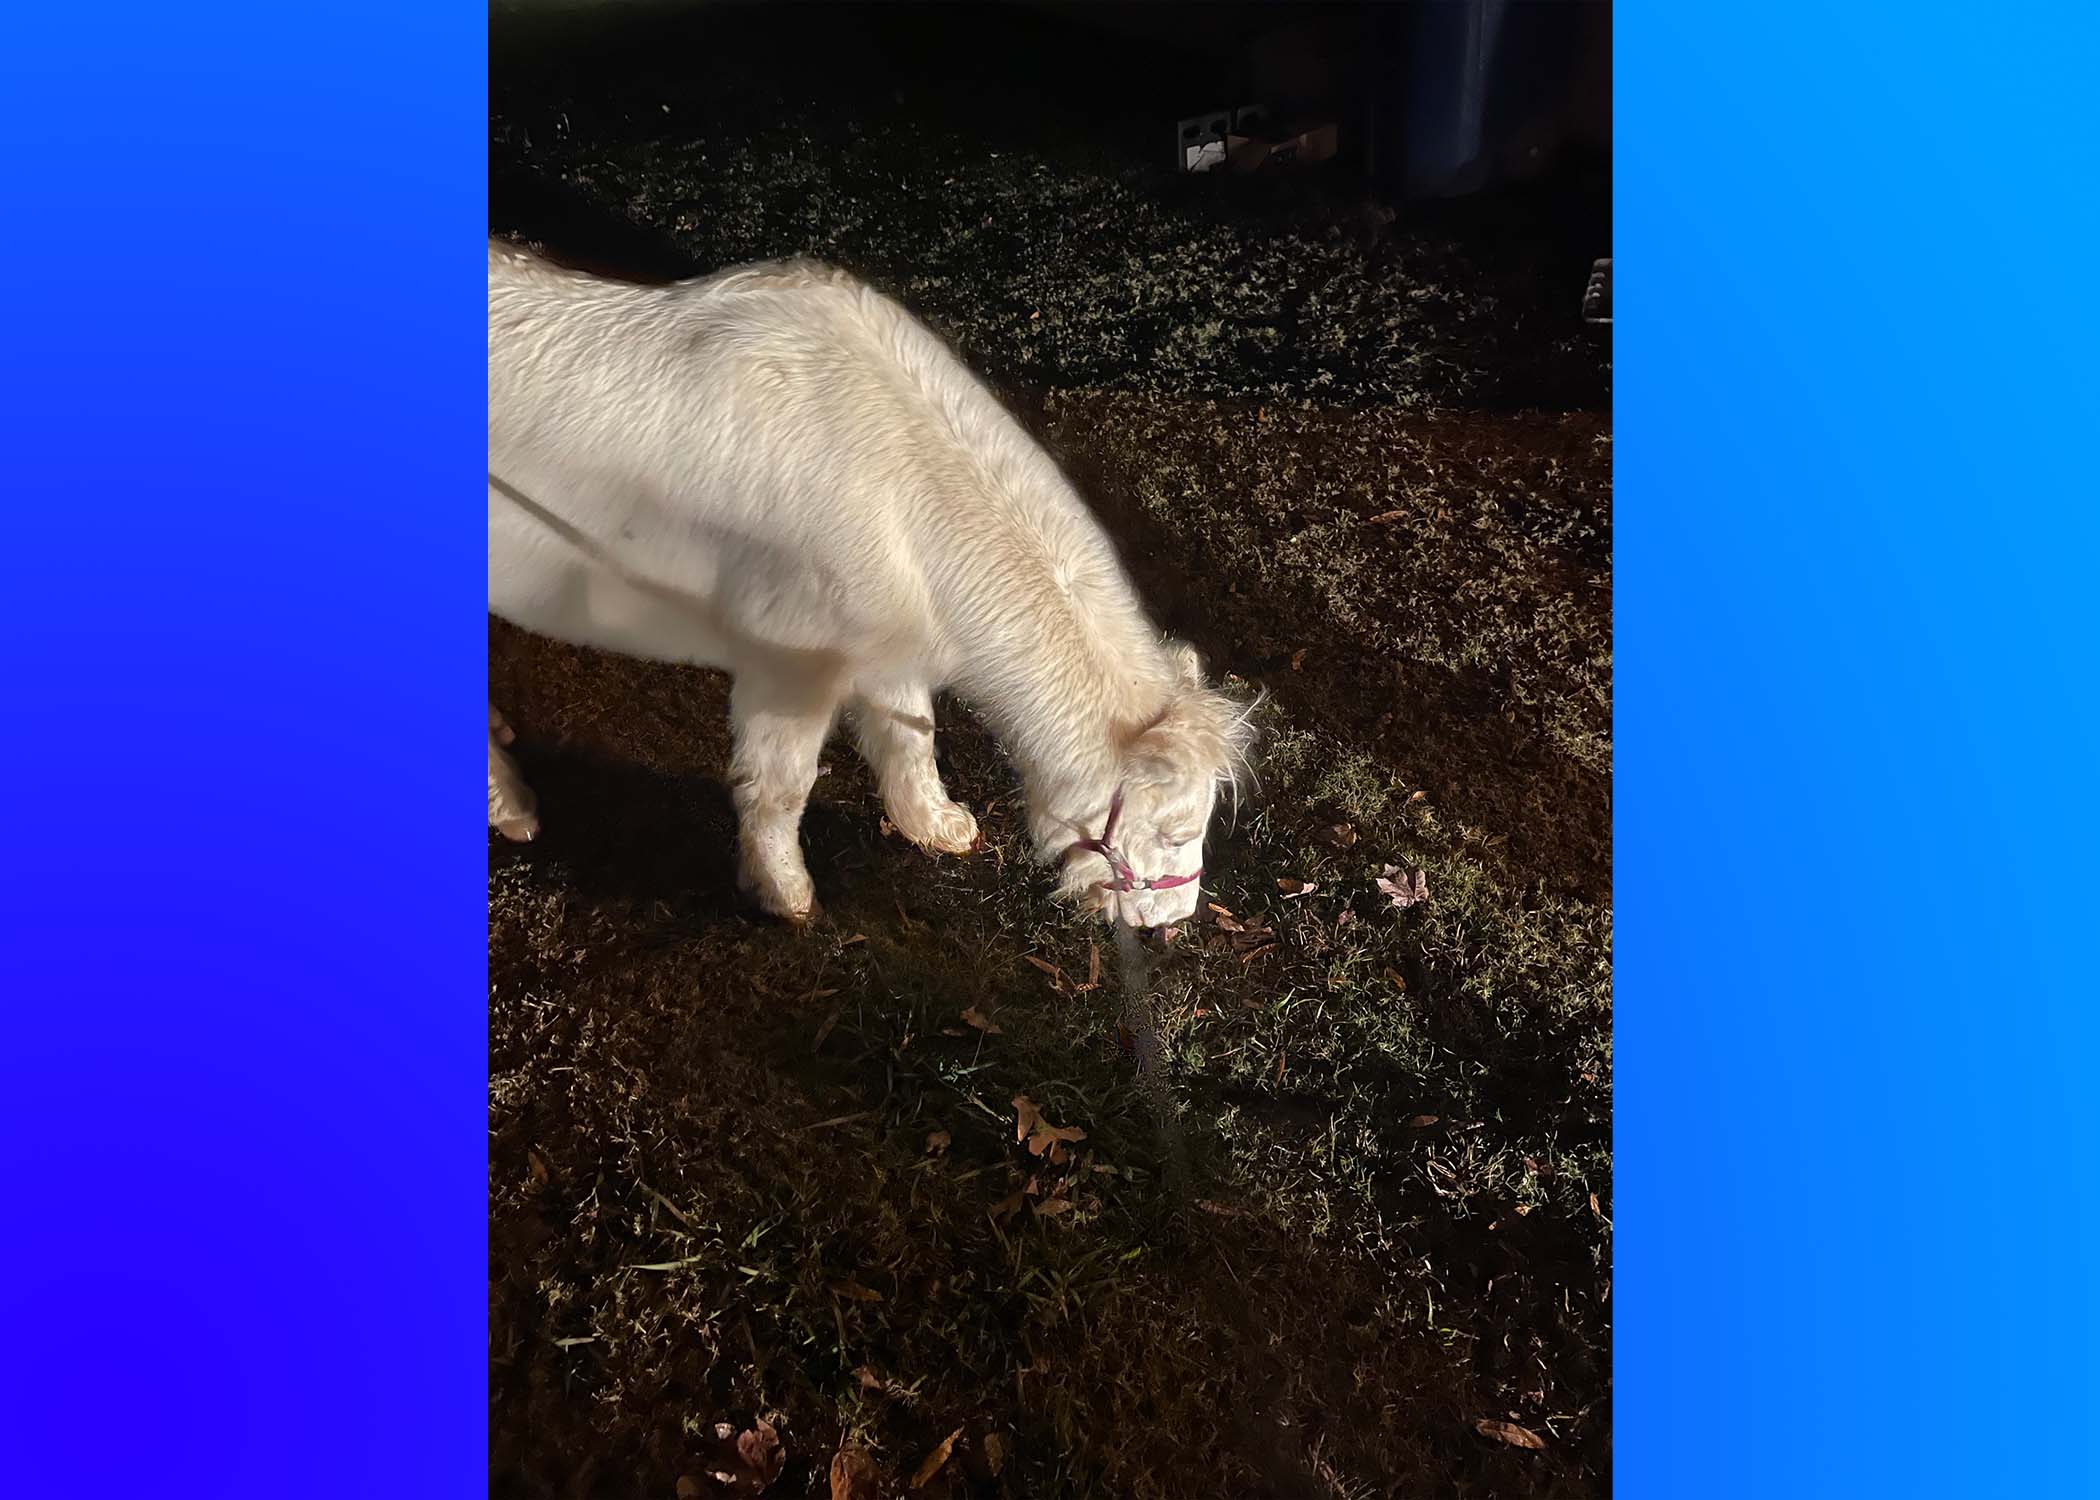 Trussville PD helps find lost pony's family